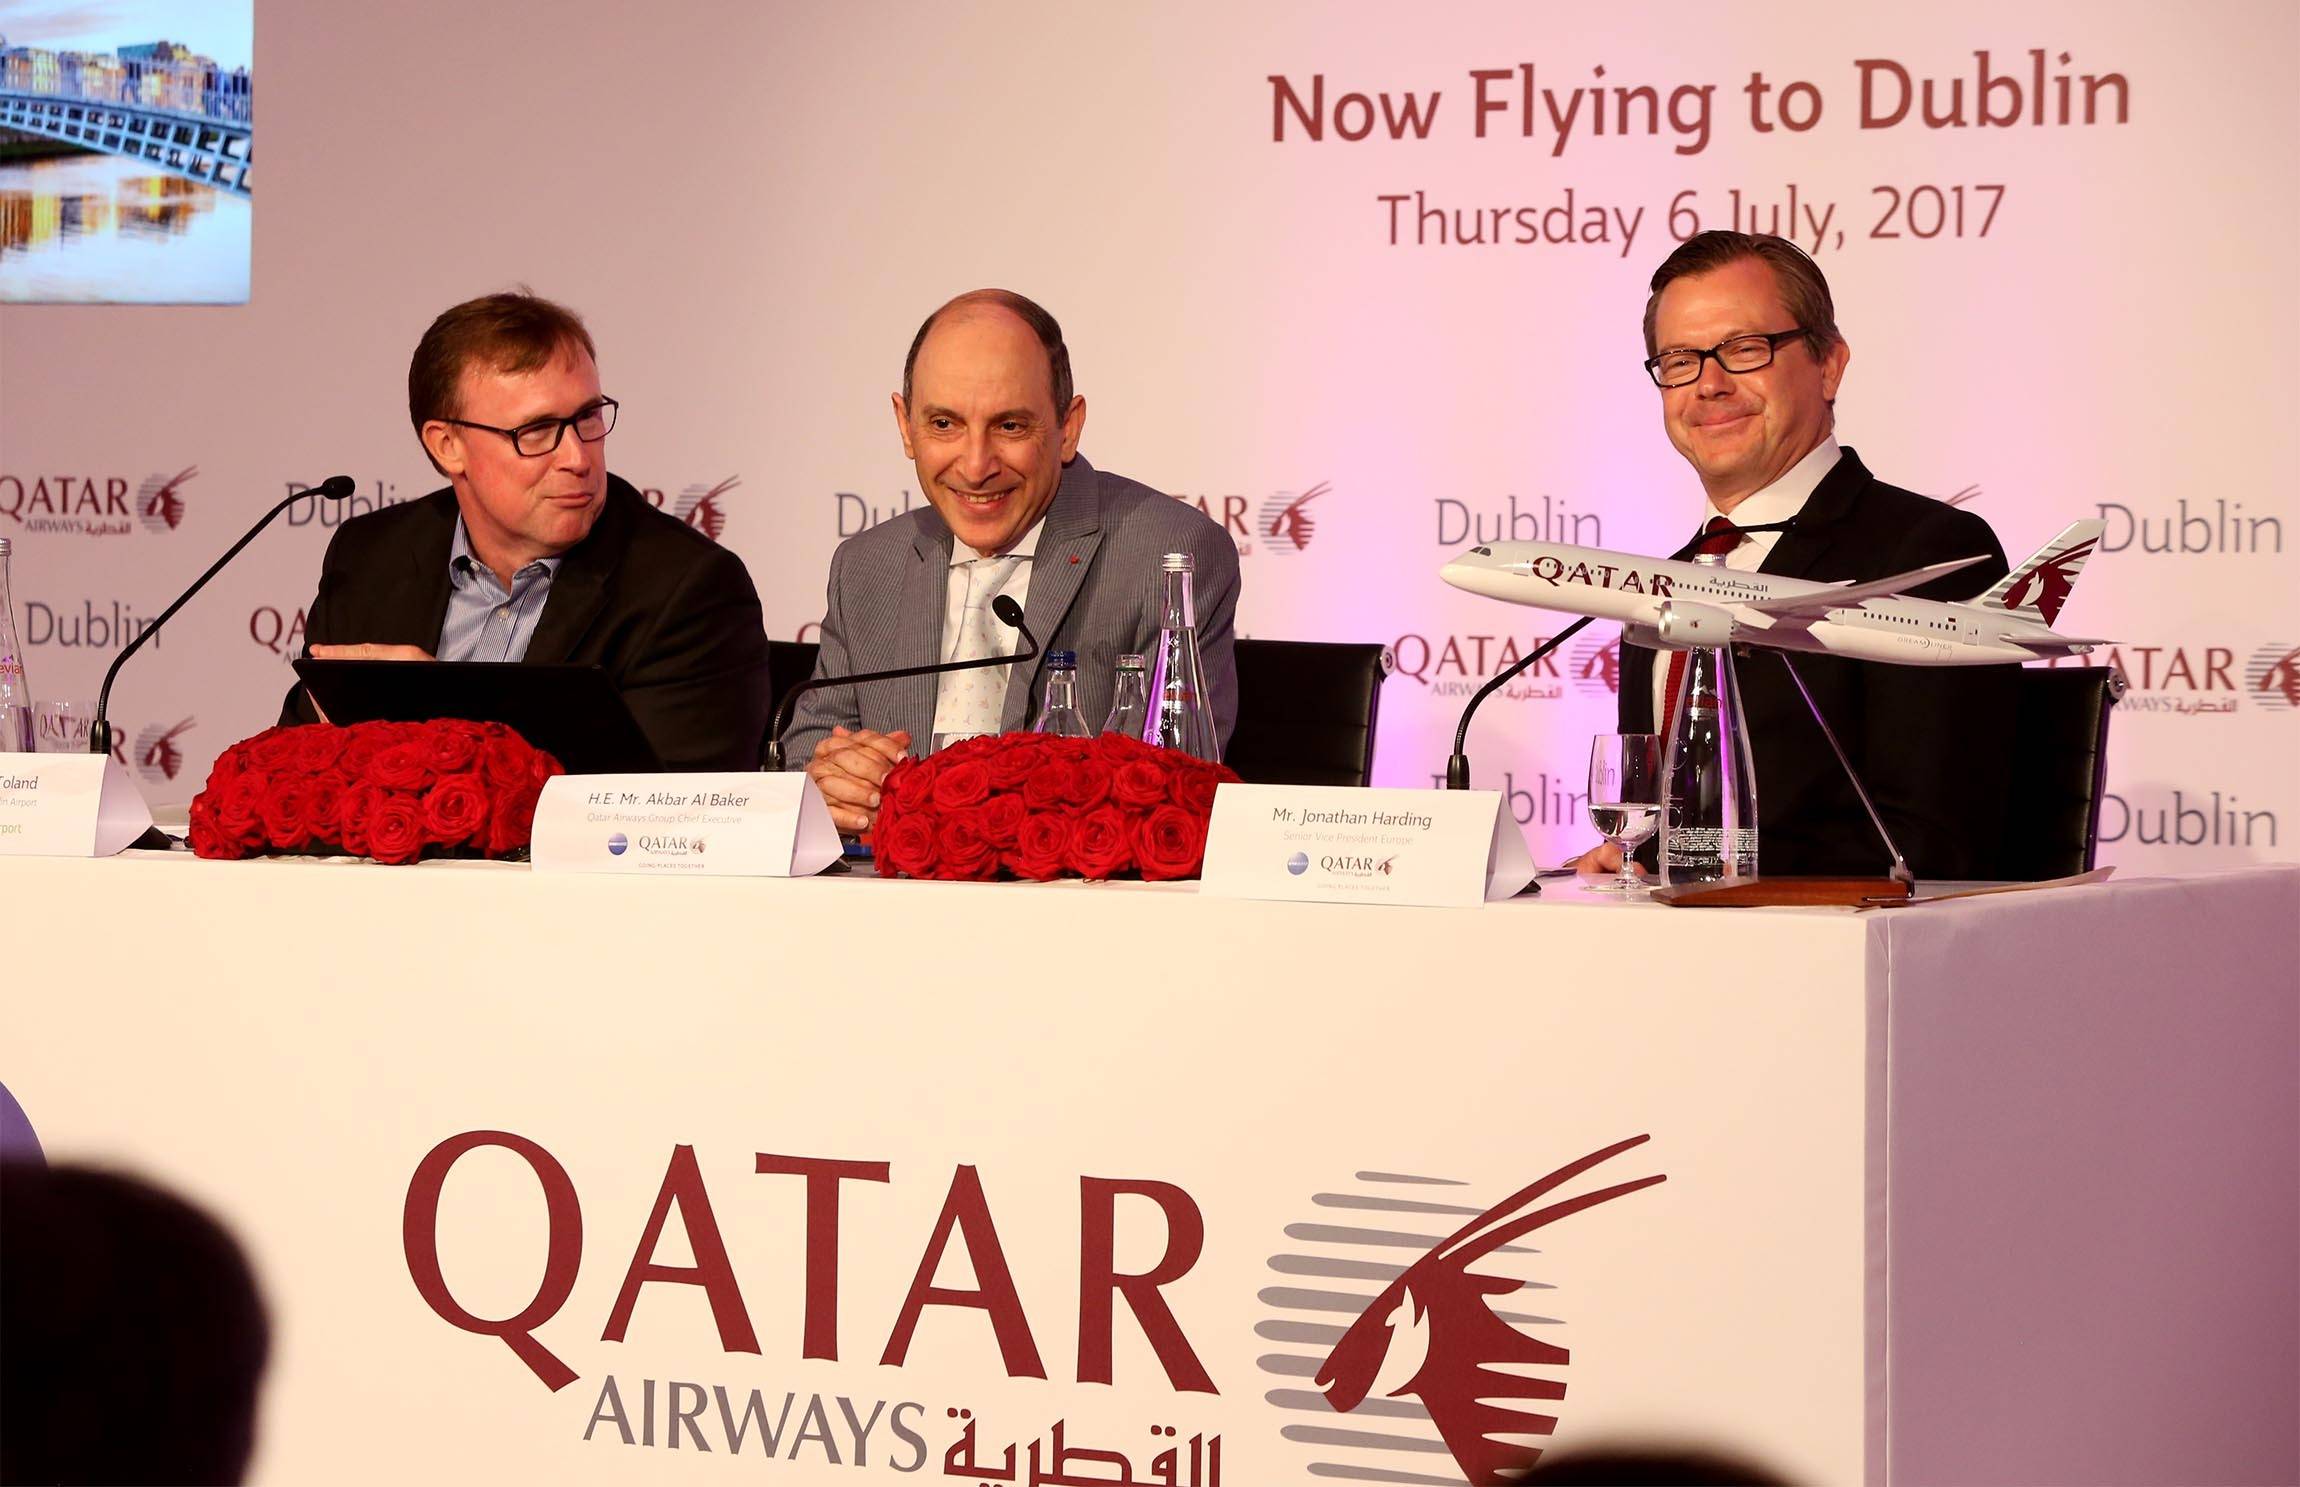 Qatar Airways Celebrates Official Launch Of New Direct Daily Route To Dublin With Press Conference